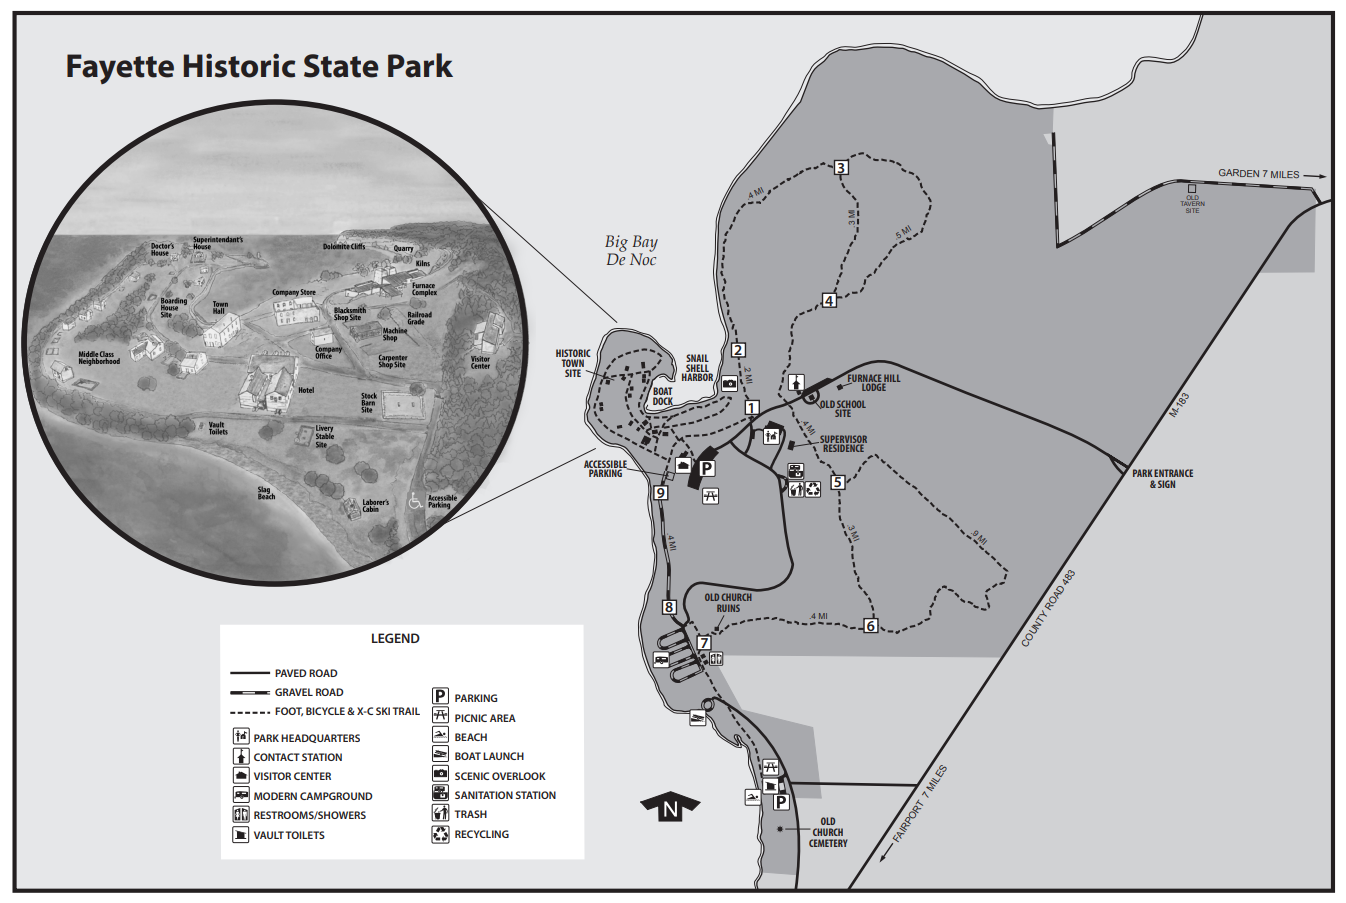 A map of Fayette Historic State Park from the DNR.